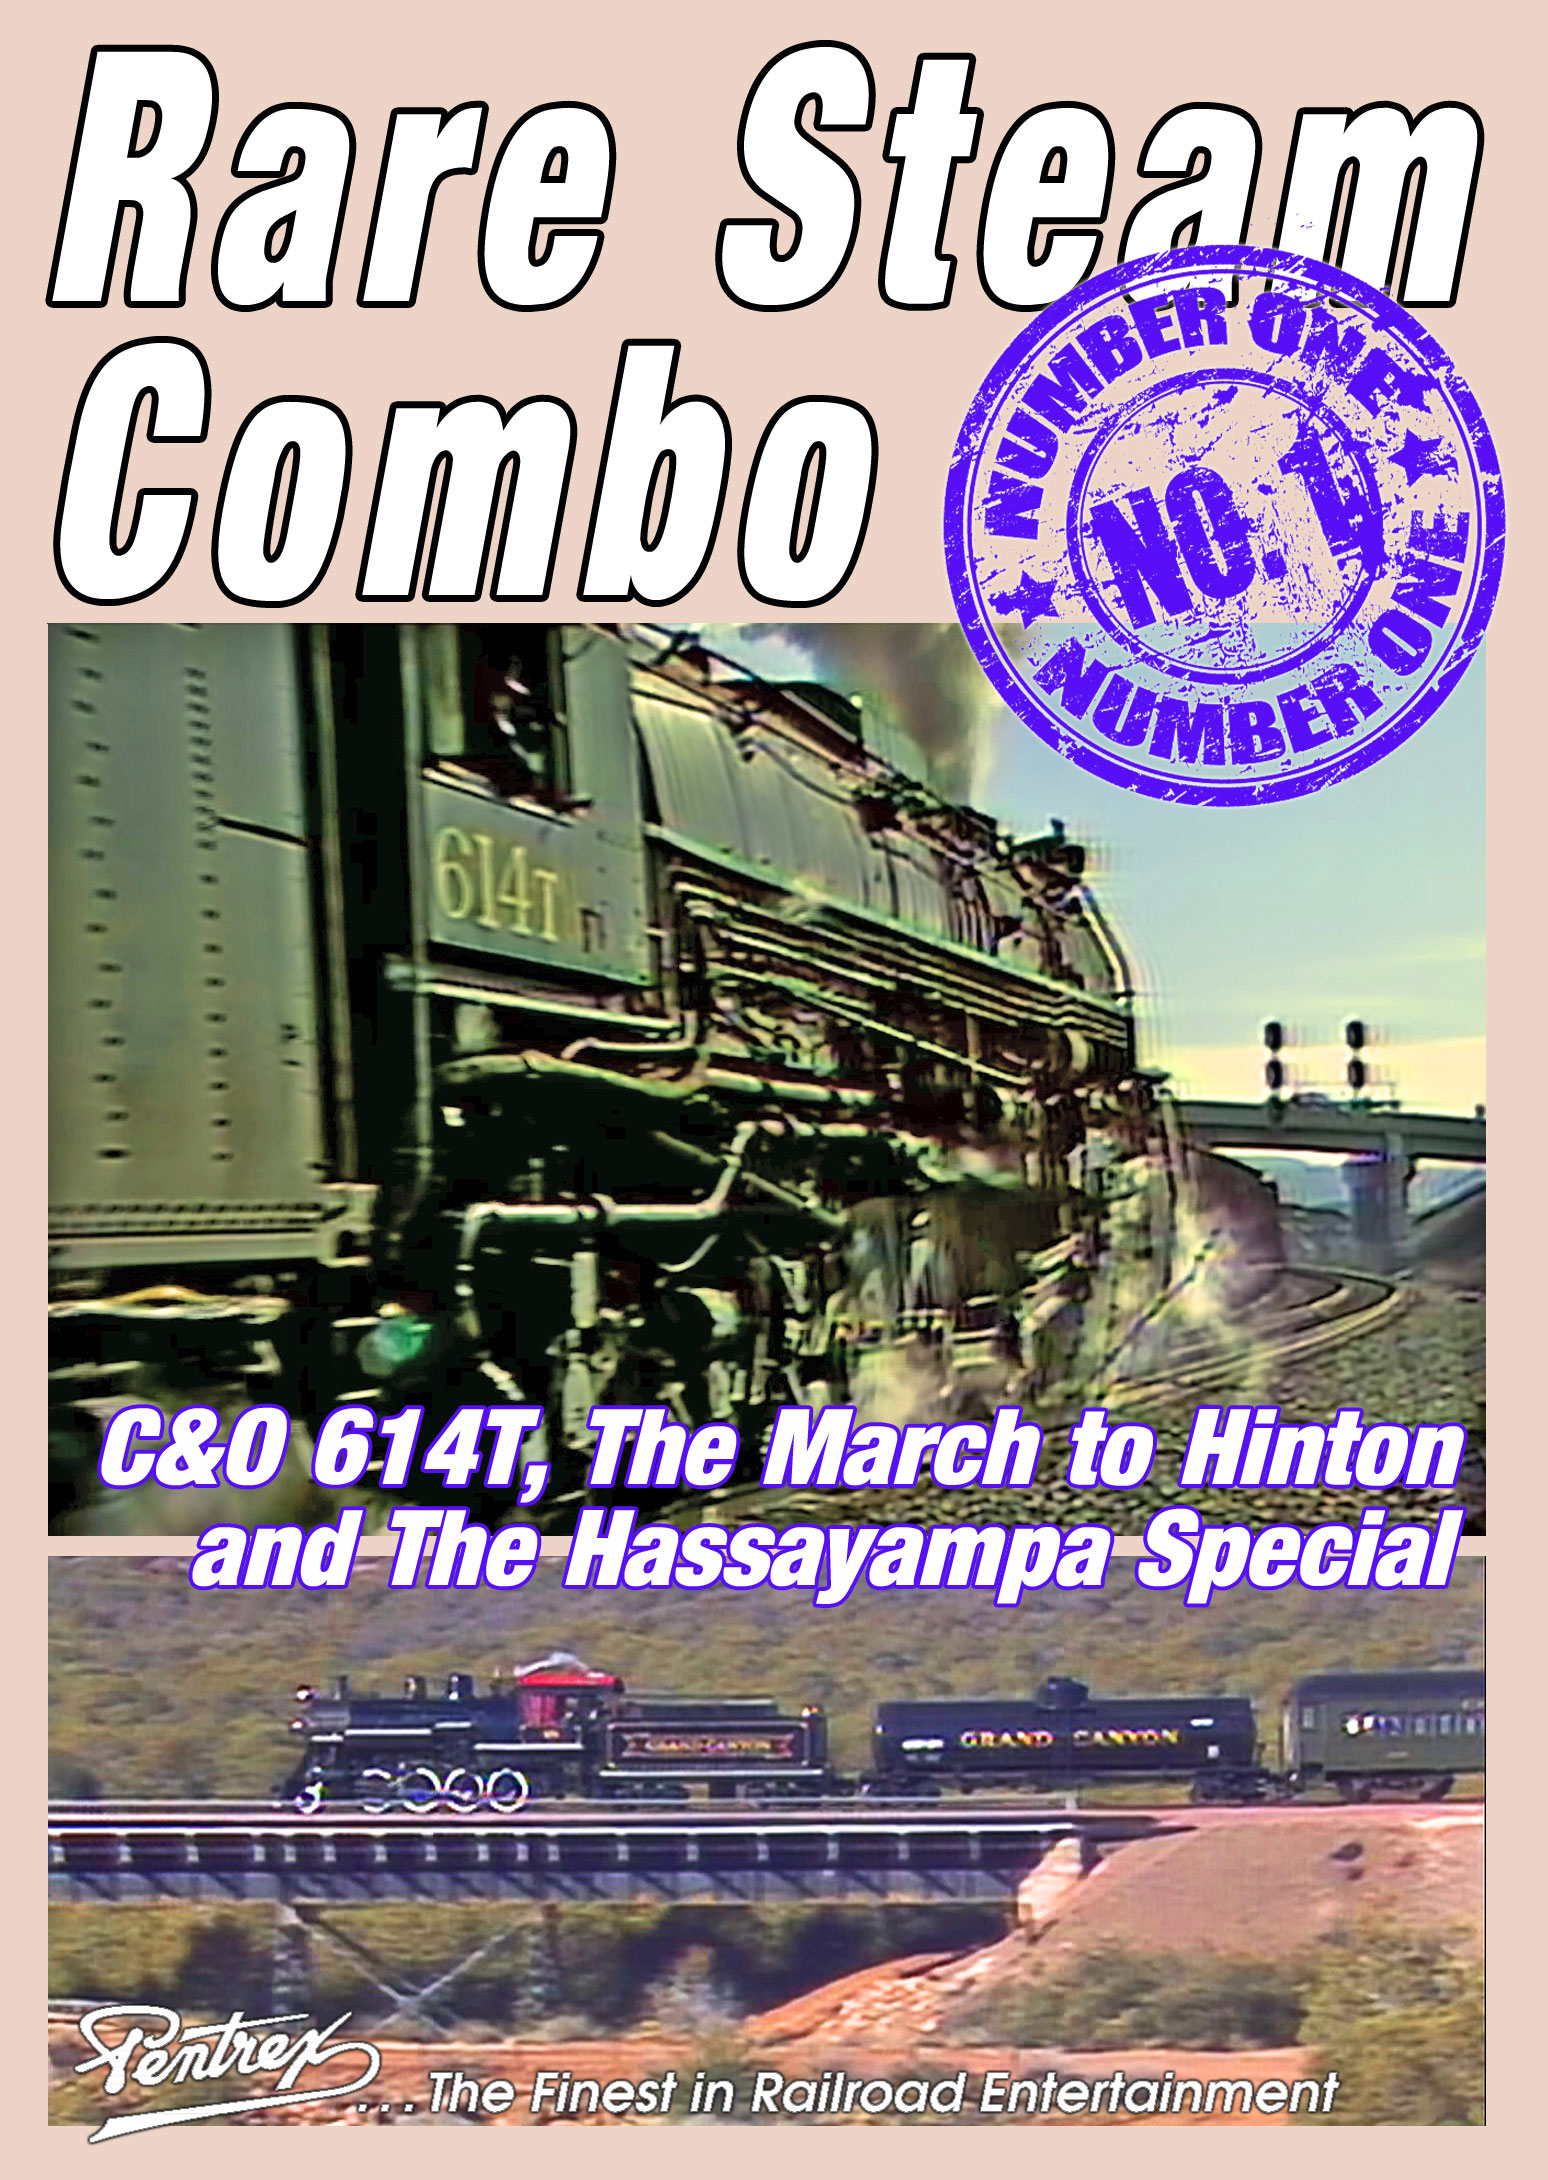 C&O 614T The March to Hinton and The Hassayampa Special - Rare Steam Combo DVD